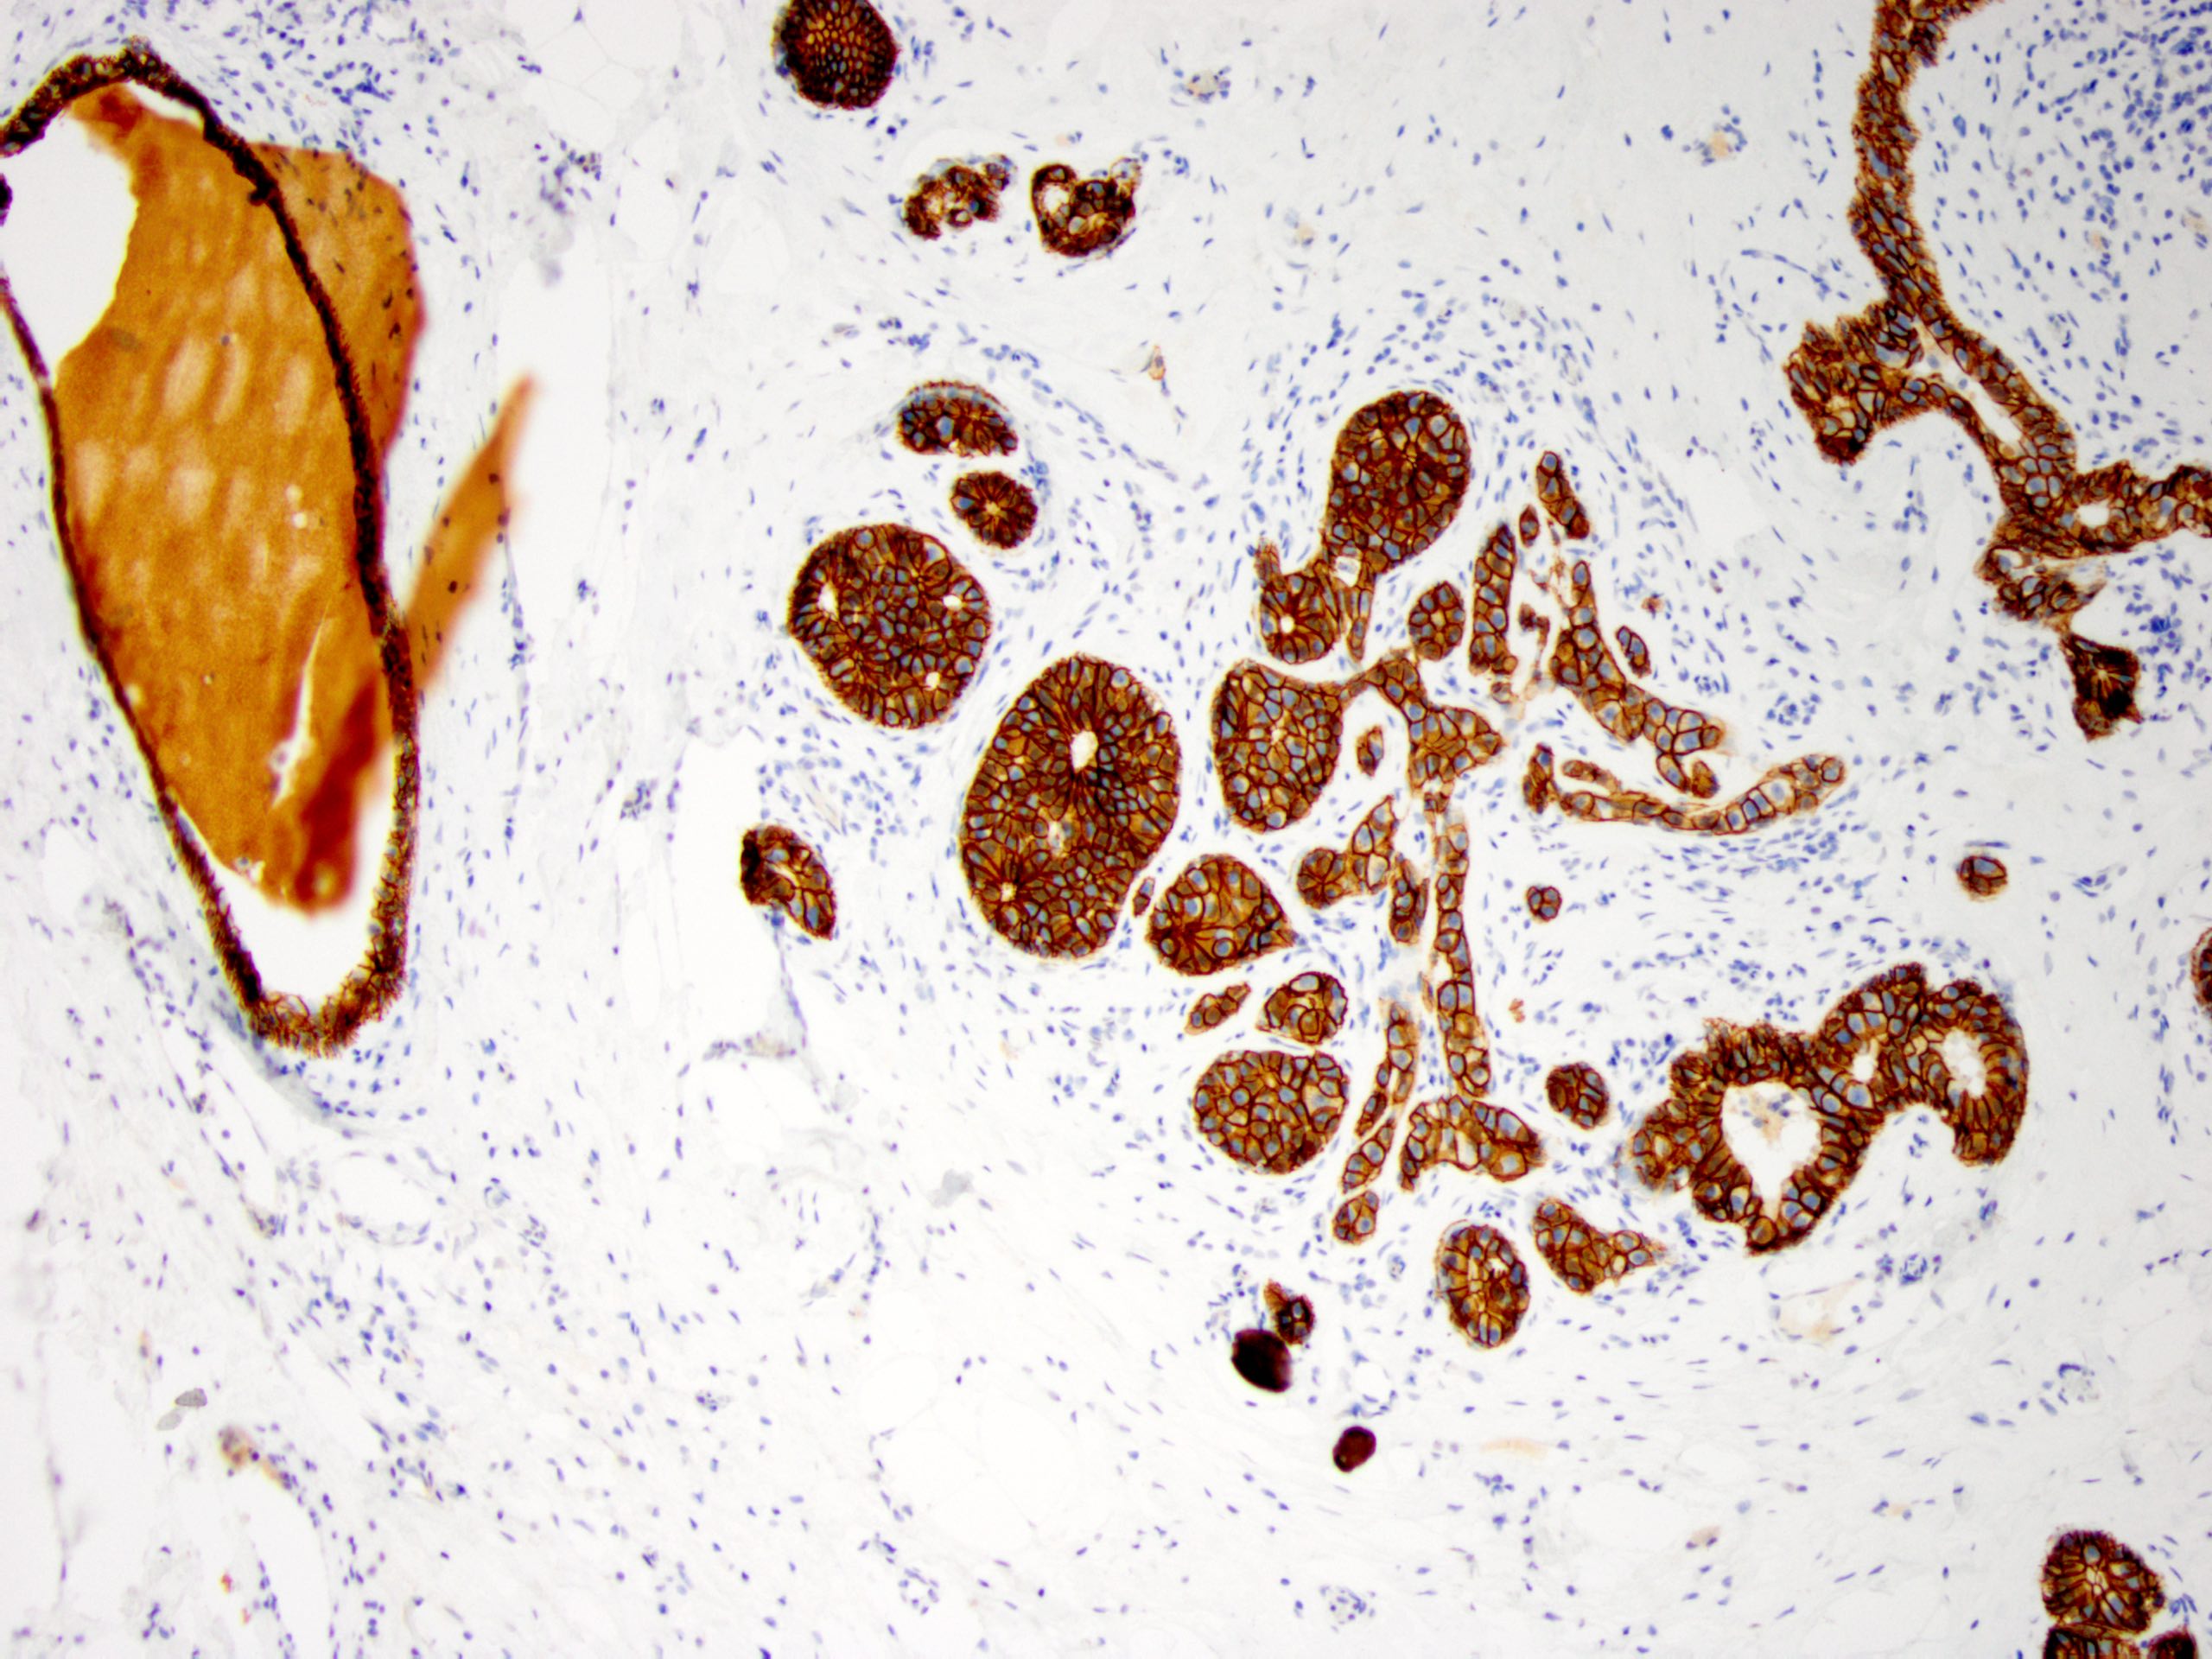 Ductal carcinoma in situ with lobular features